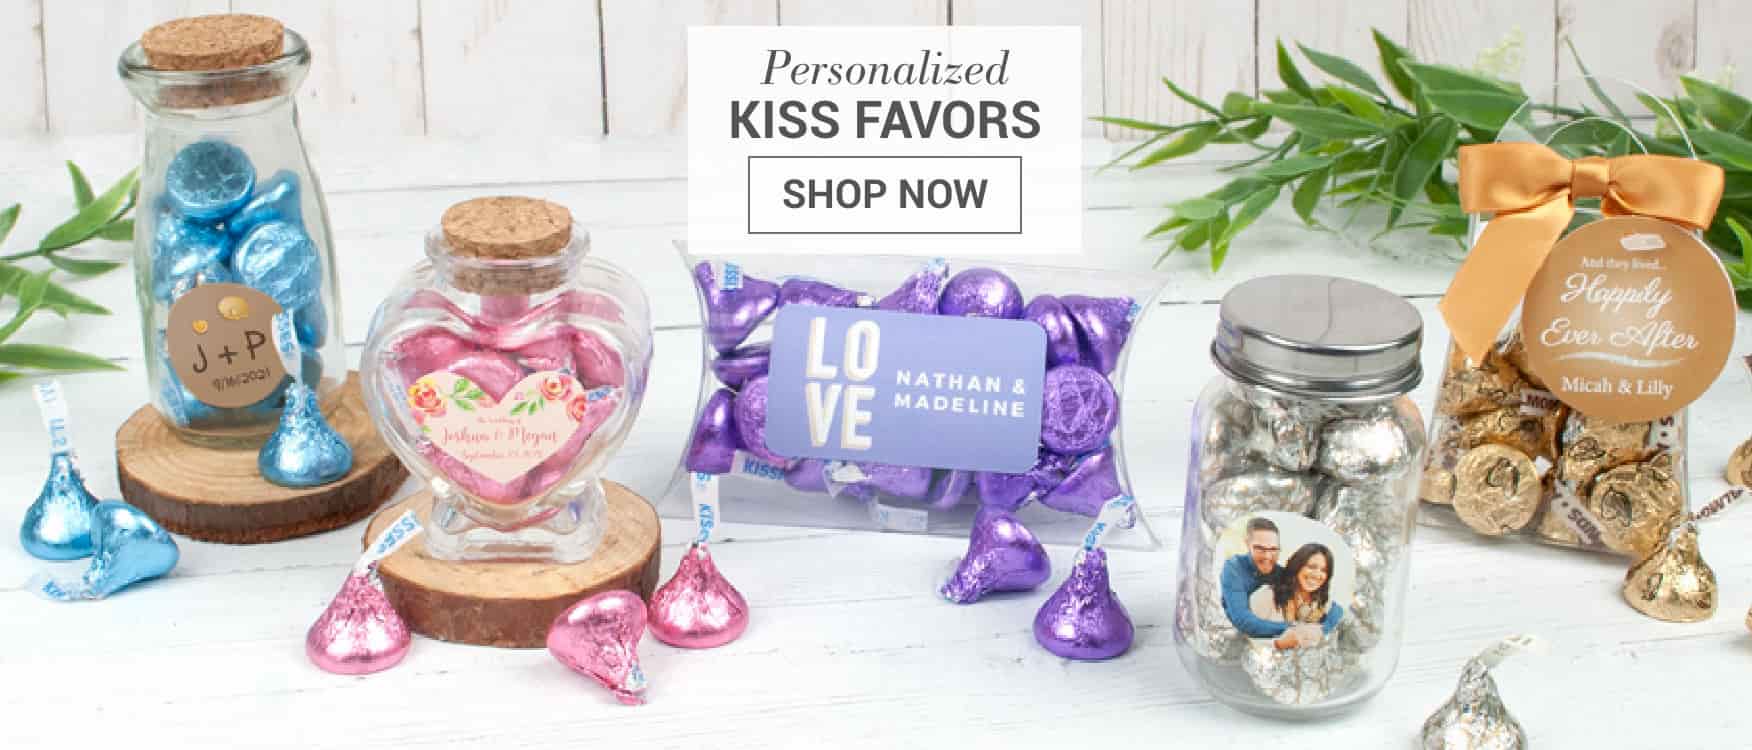 Personalized Hershey's Kiss Chocolate Favors